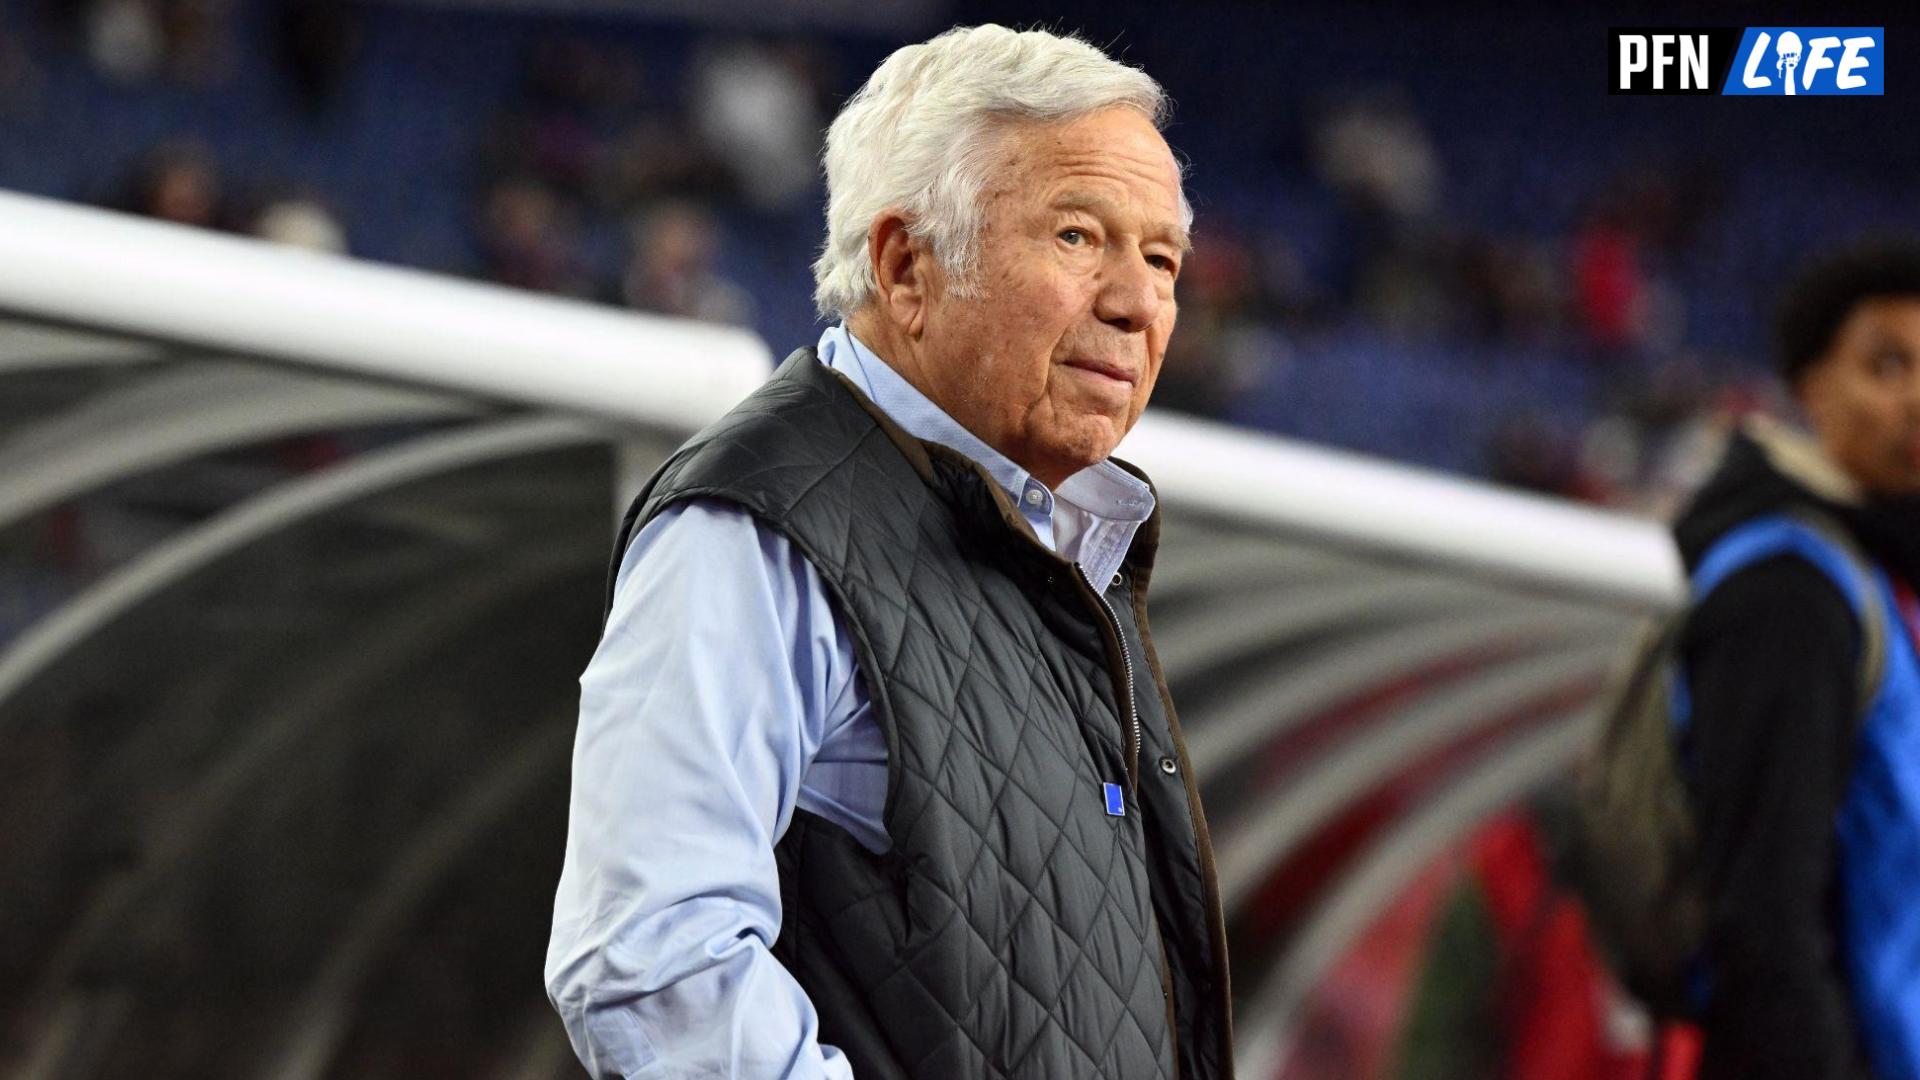 The owner of the New England Revolution, Robert Kraft, looks on during warms ups before the game against the Philadelphia Union at Gillette Stadium.